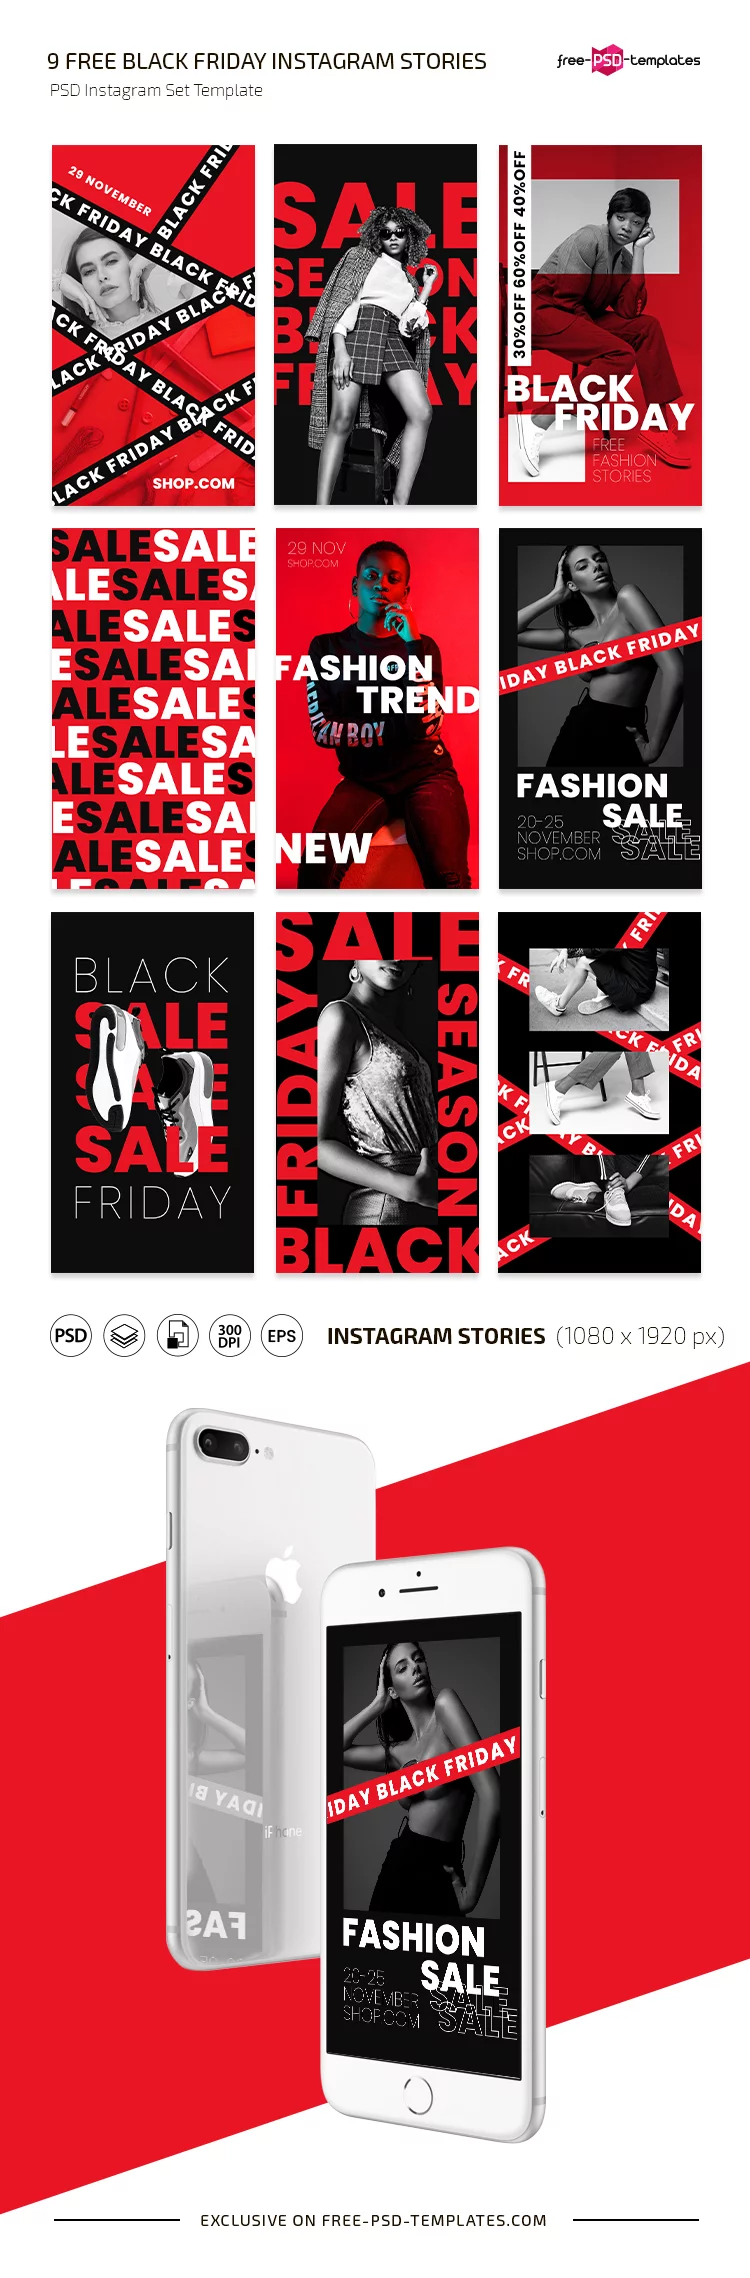 Free Black Friday Instagram Stories Set Templates in PSD + Vector (.ai+.eps)